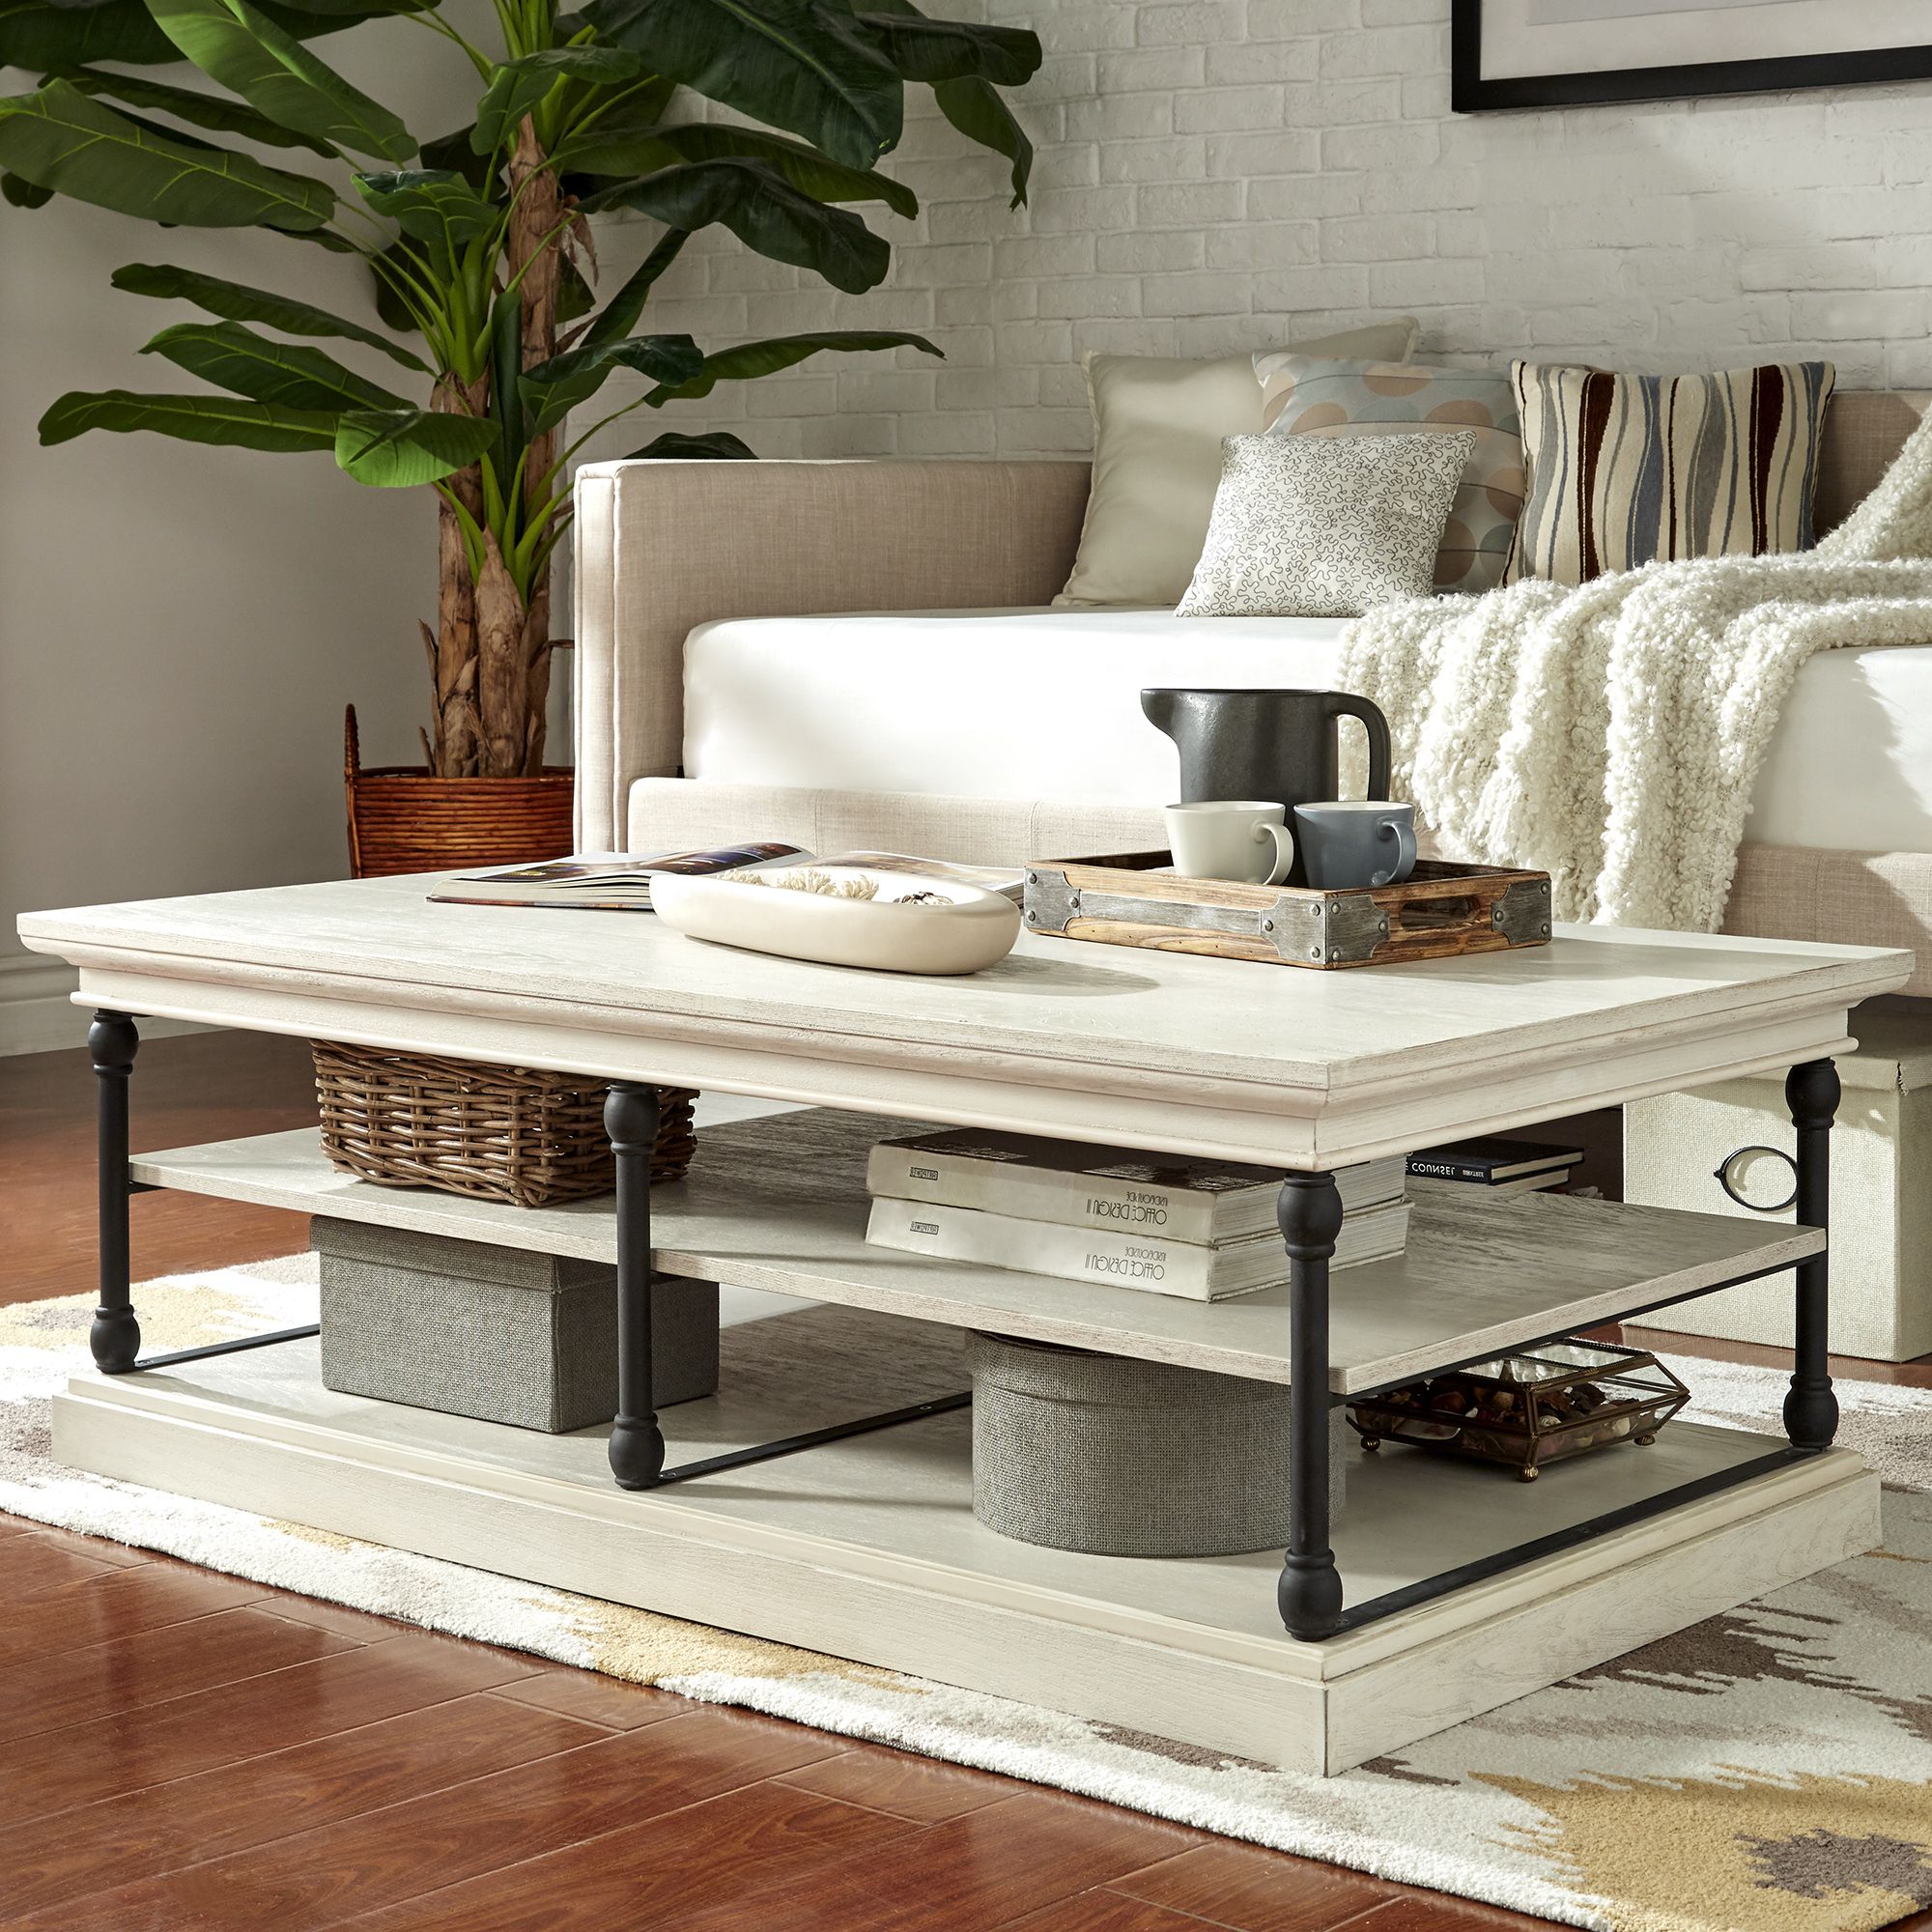 Cornice Rectangle Storage Shelf Coffee Table – Antique With Well Known White Triangular Coffee Tables (View 17 of 20)